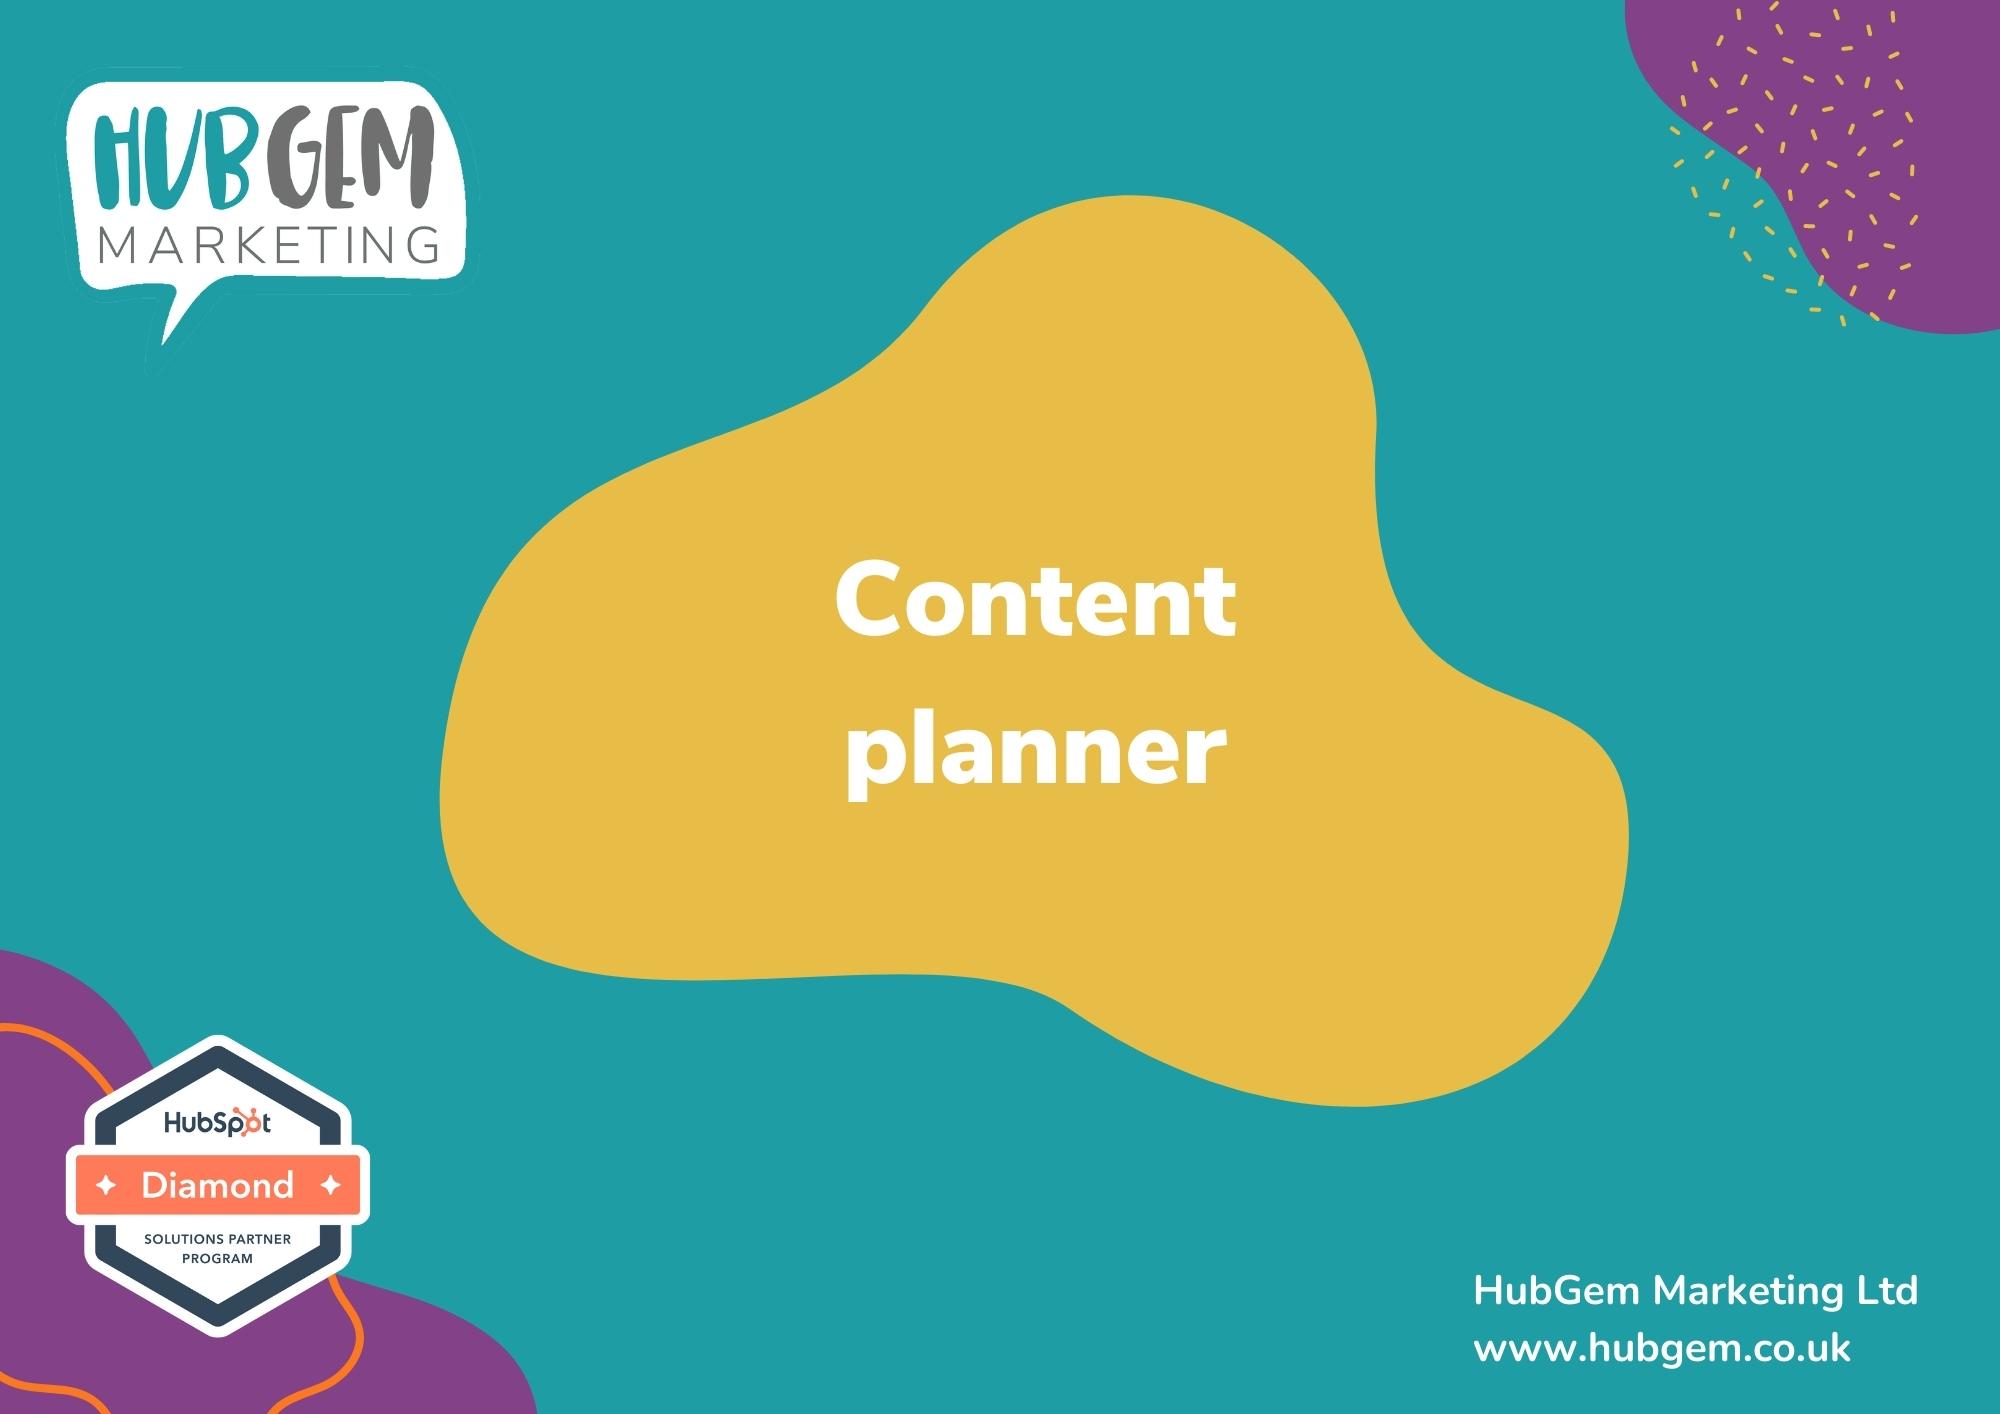 NEW Content planner